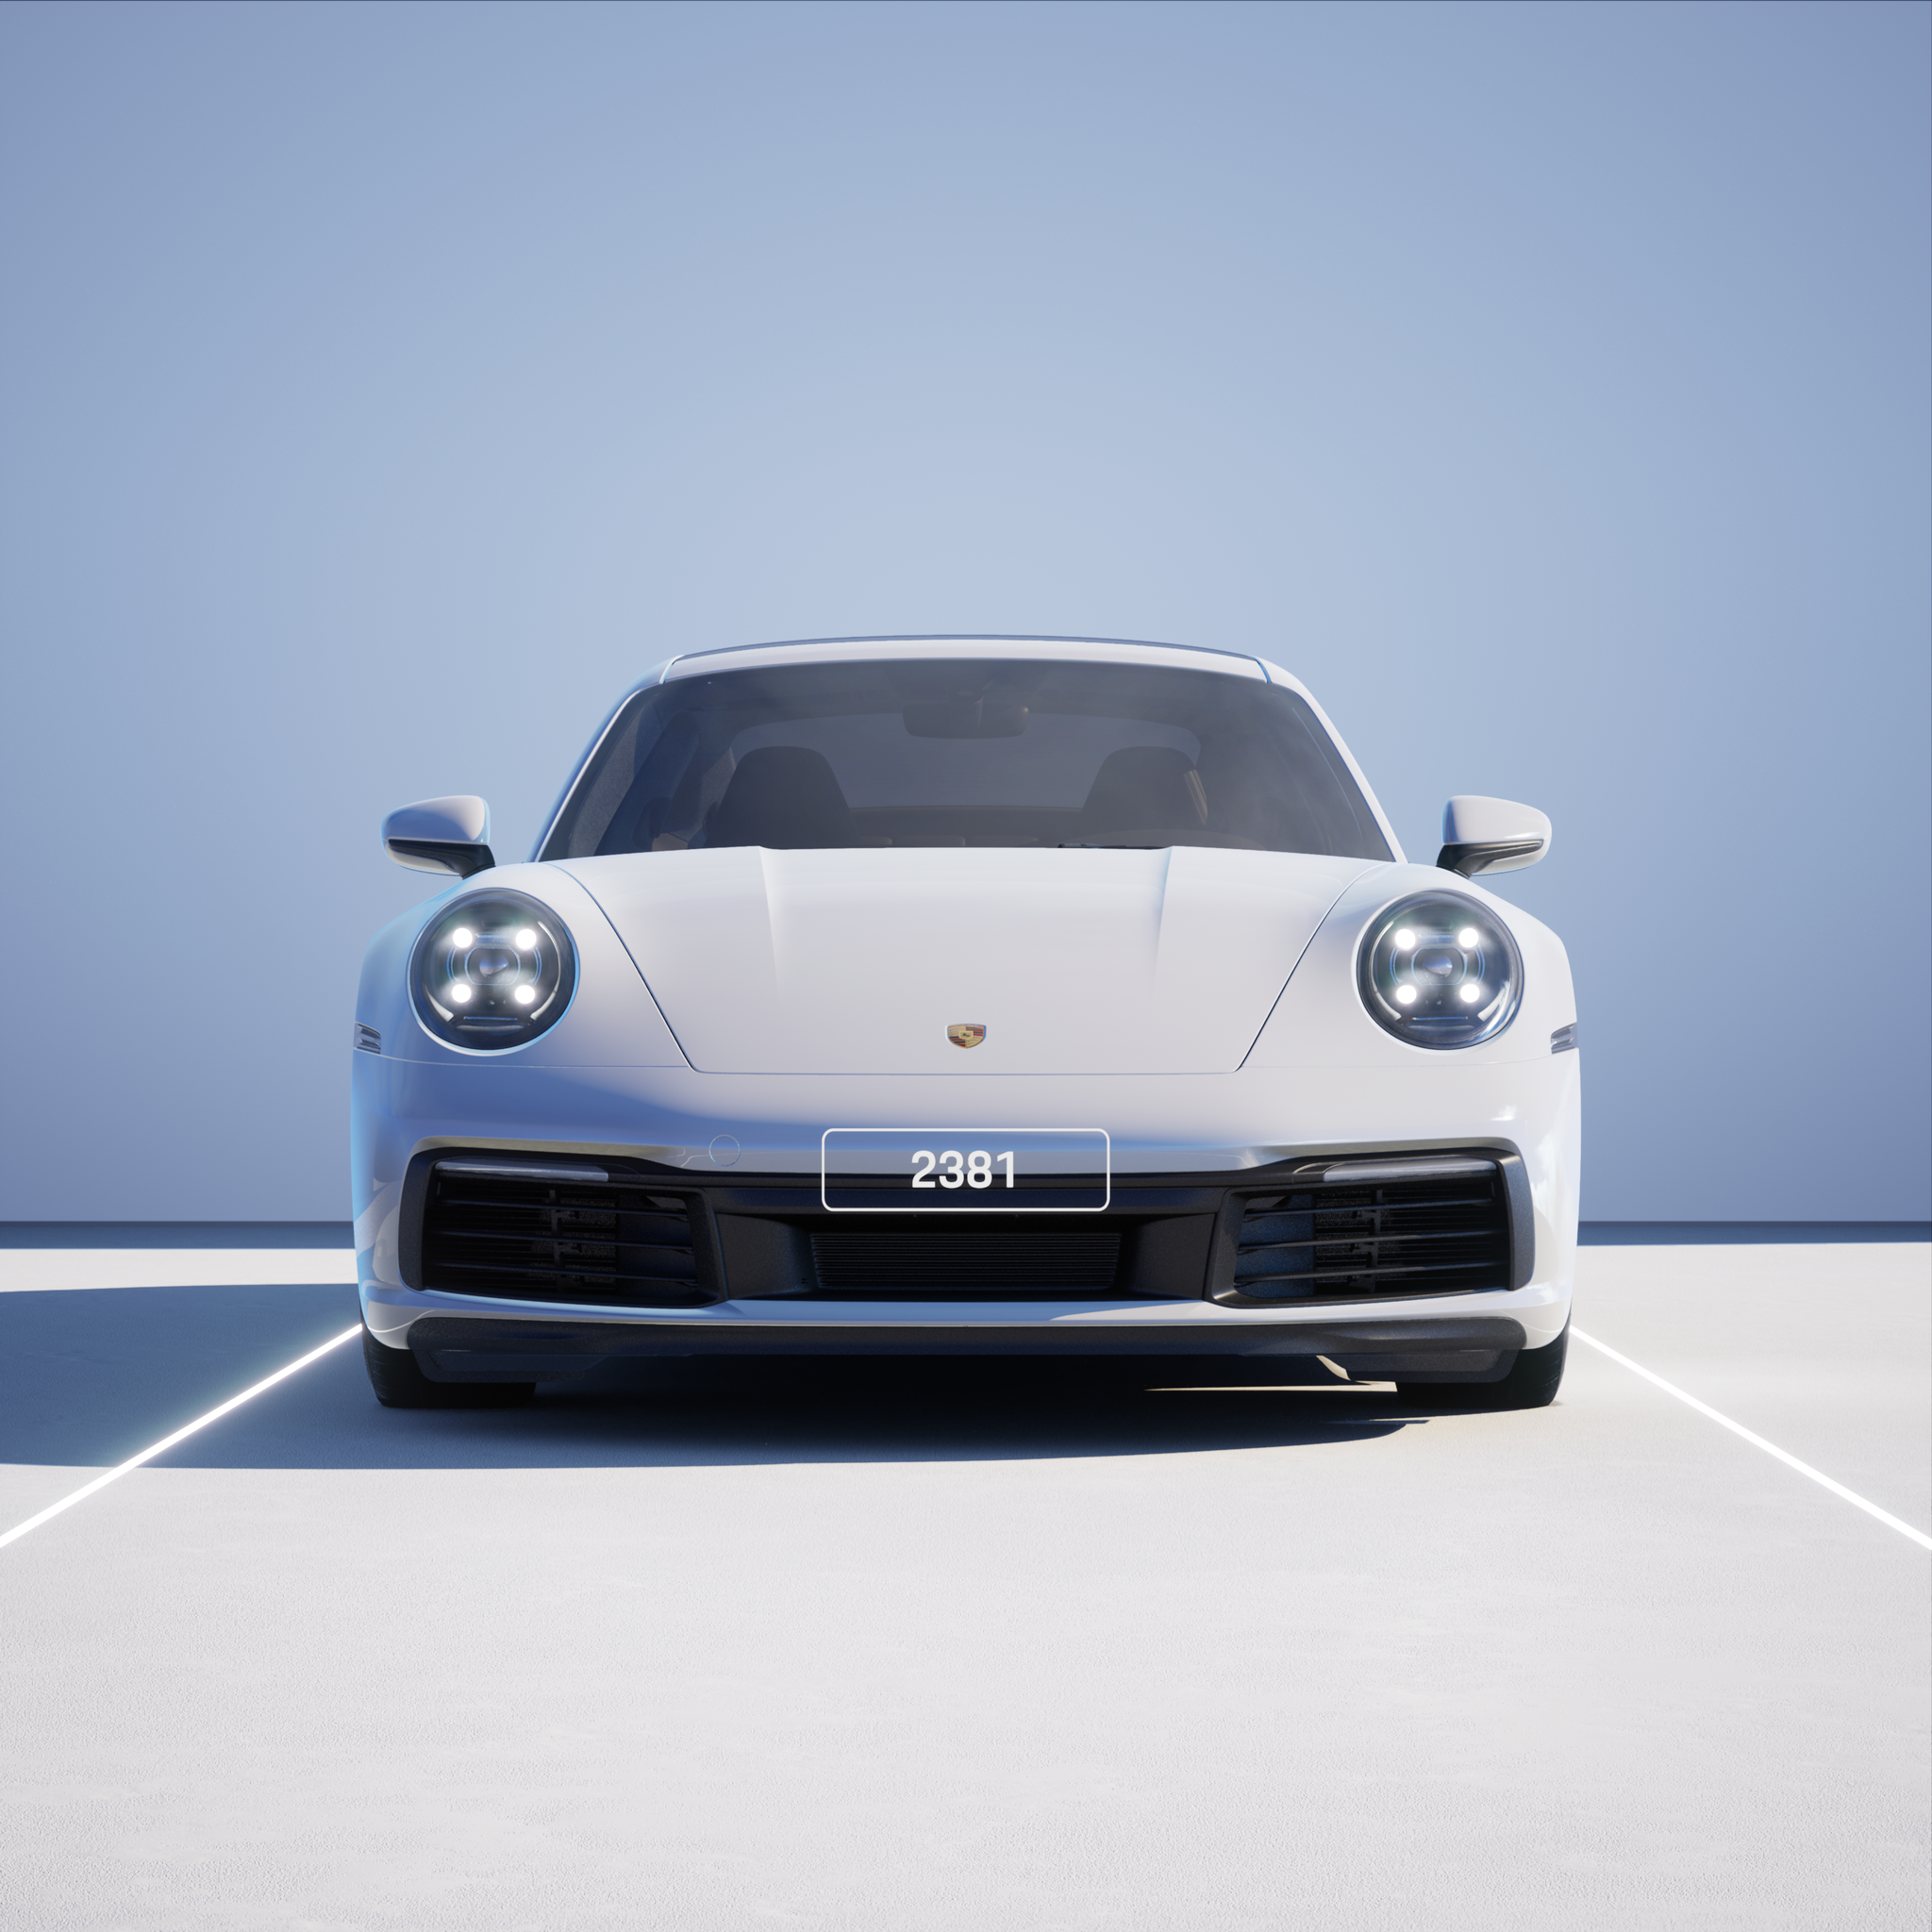 The PORSCHΞ 911 2381 image in phase